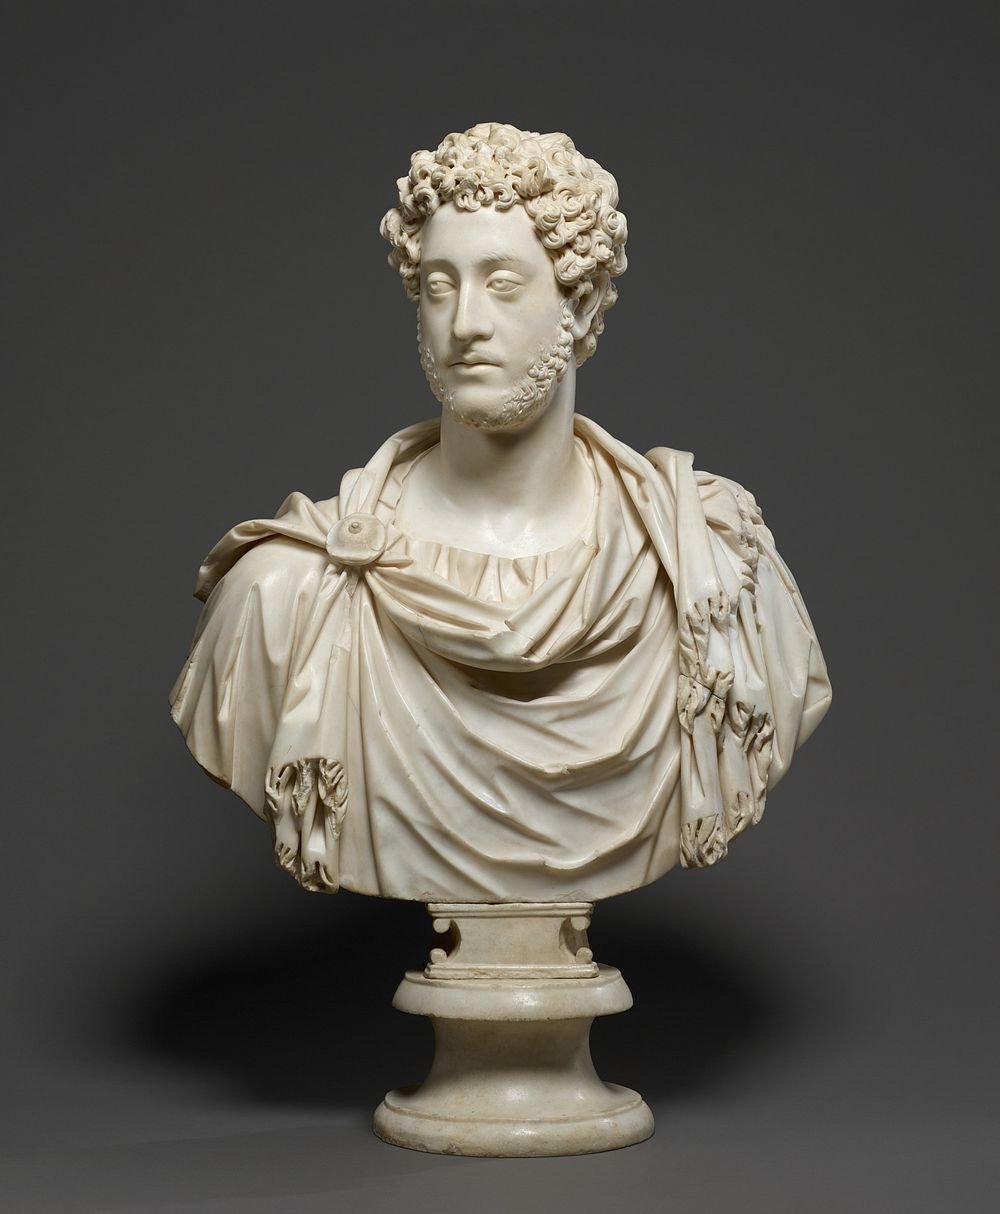 Bust of Emperor Commodus